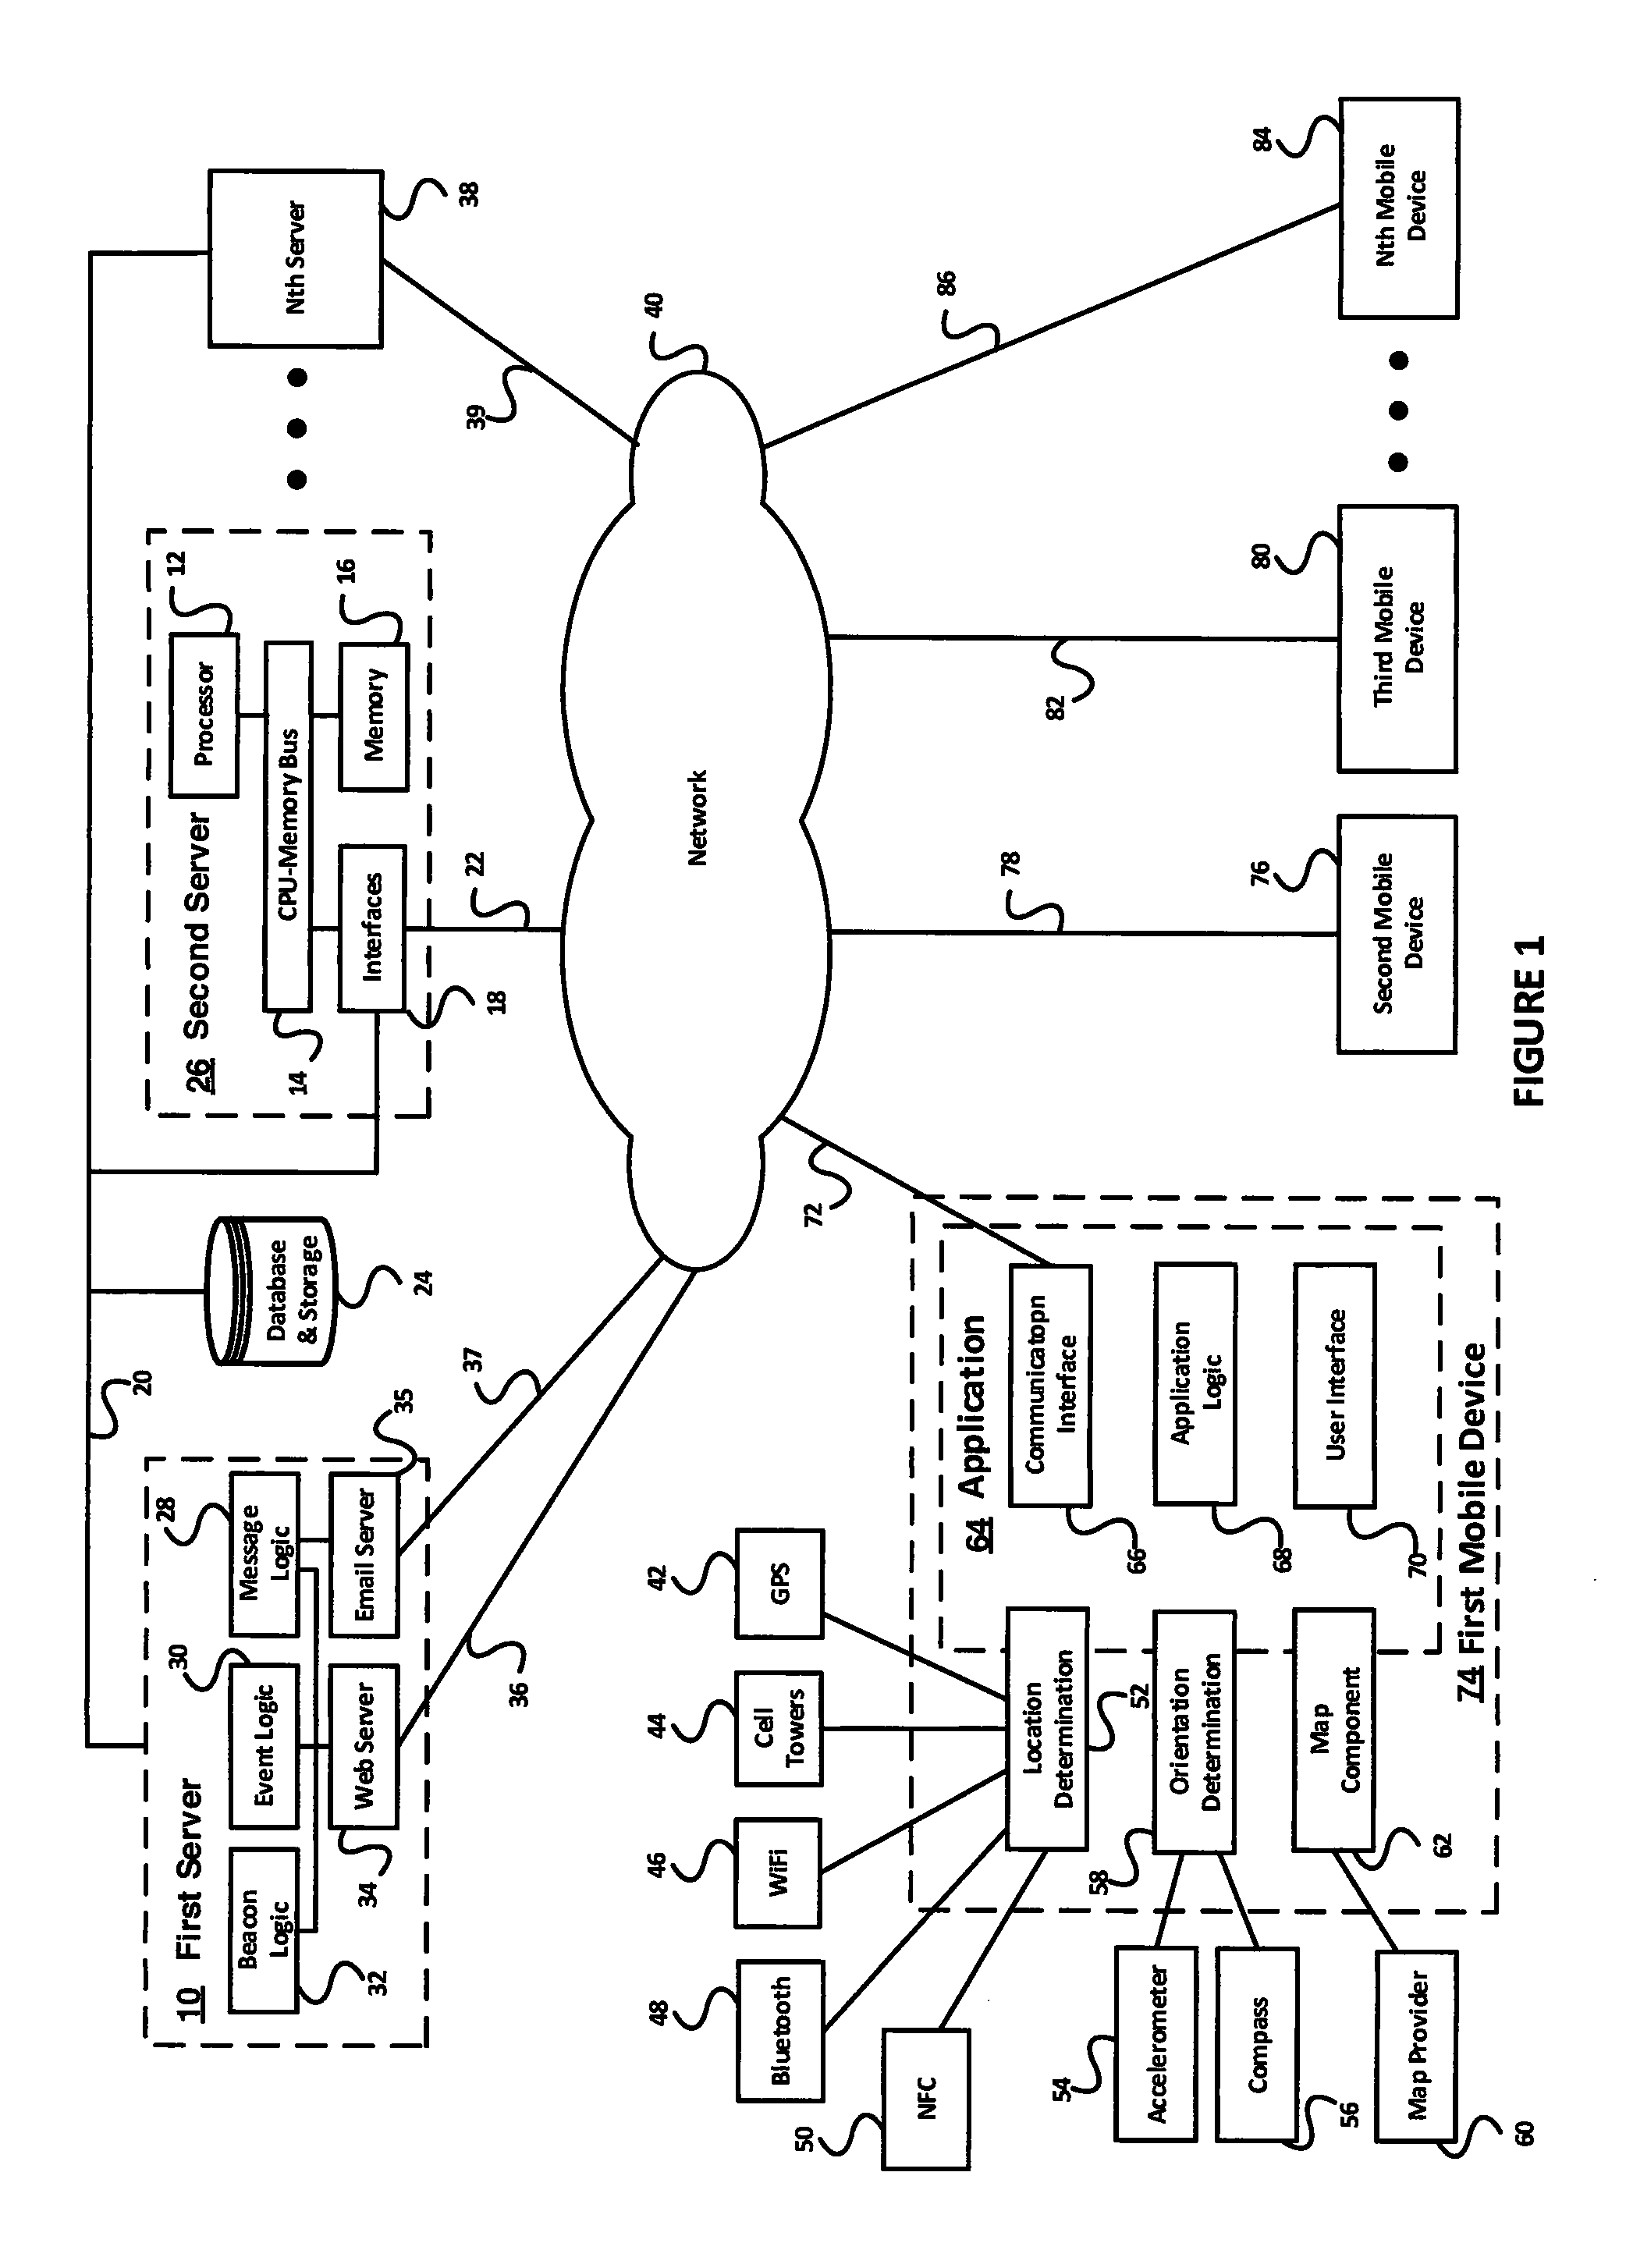 Methods and Systems for Locating Persons and Places with Mobile Devices